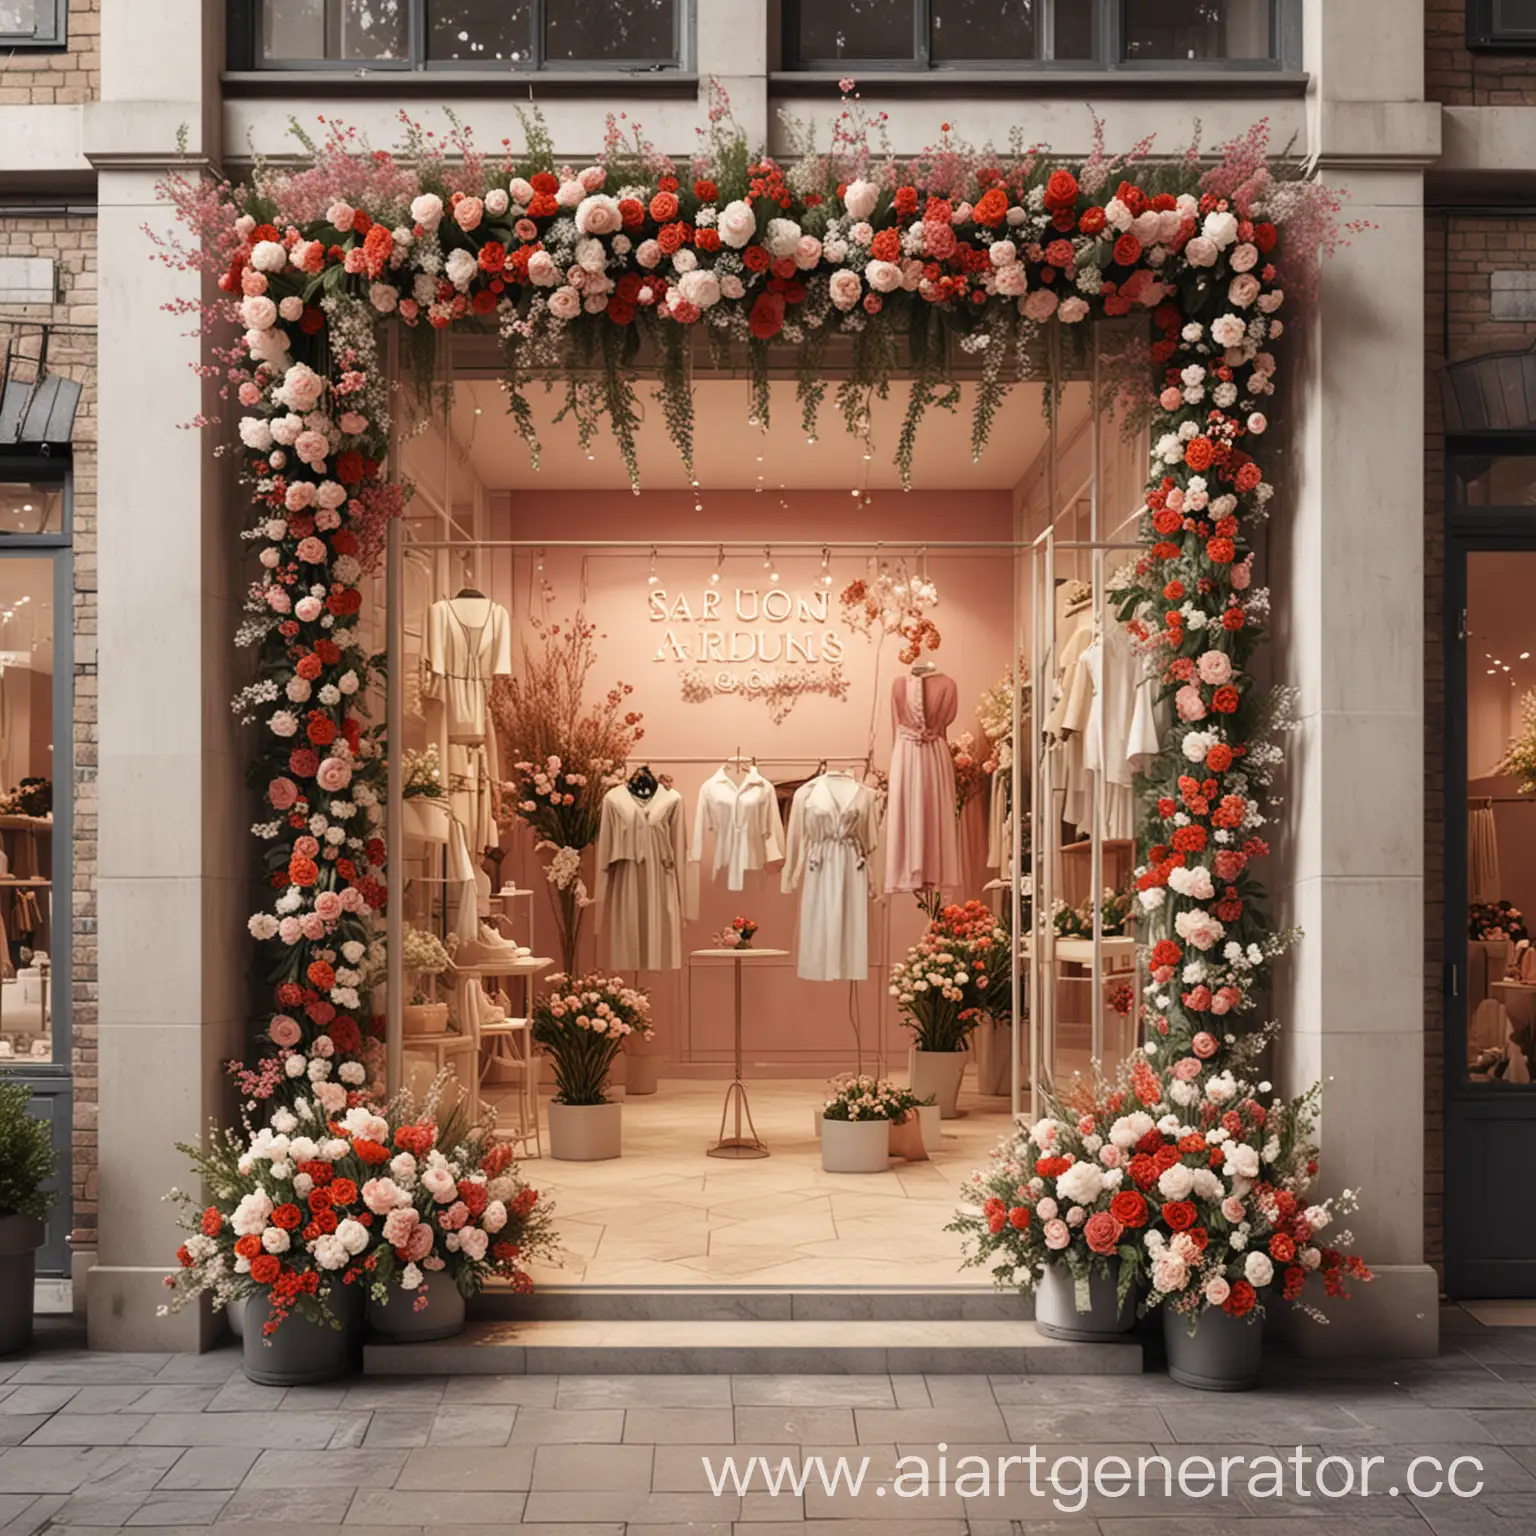 concept design of a fashion store, flower decorations around